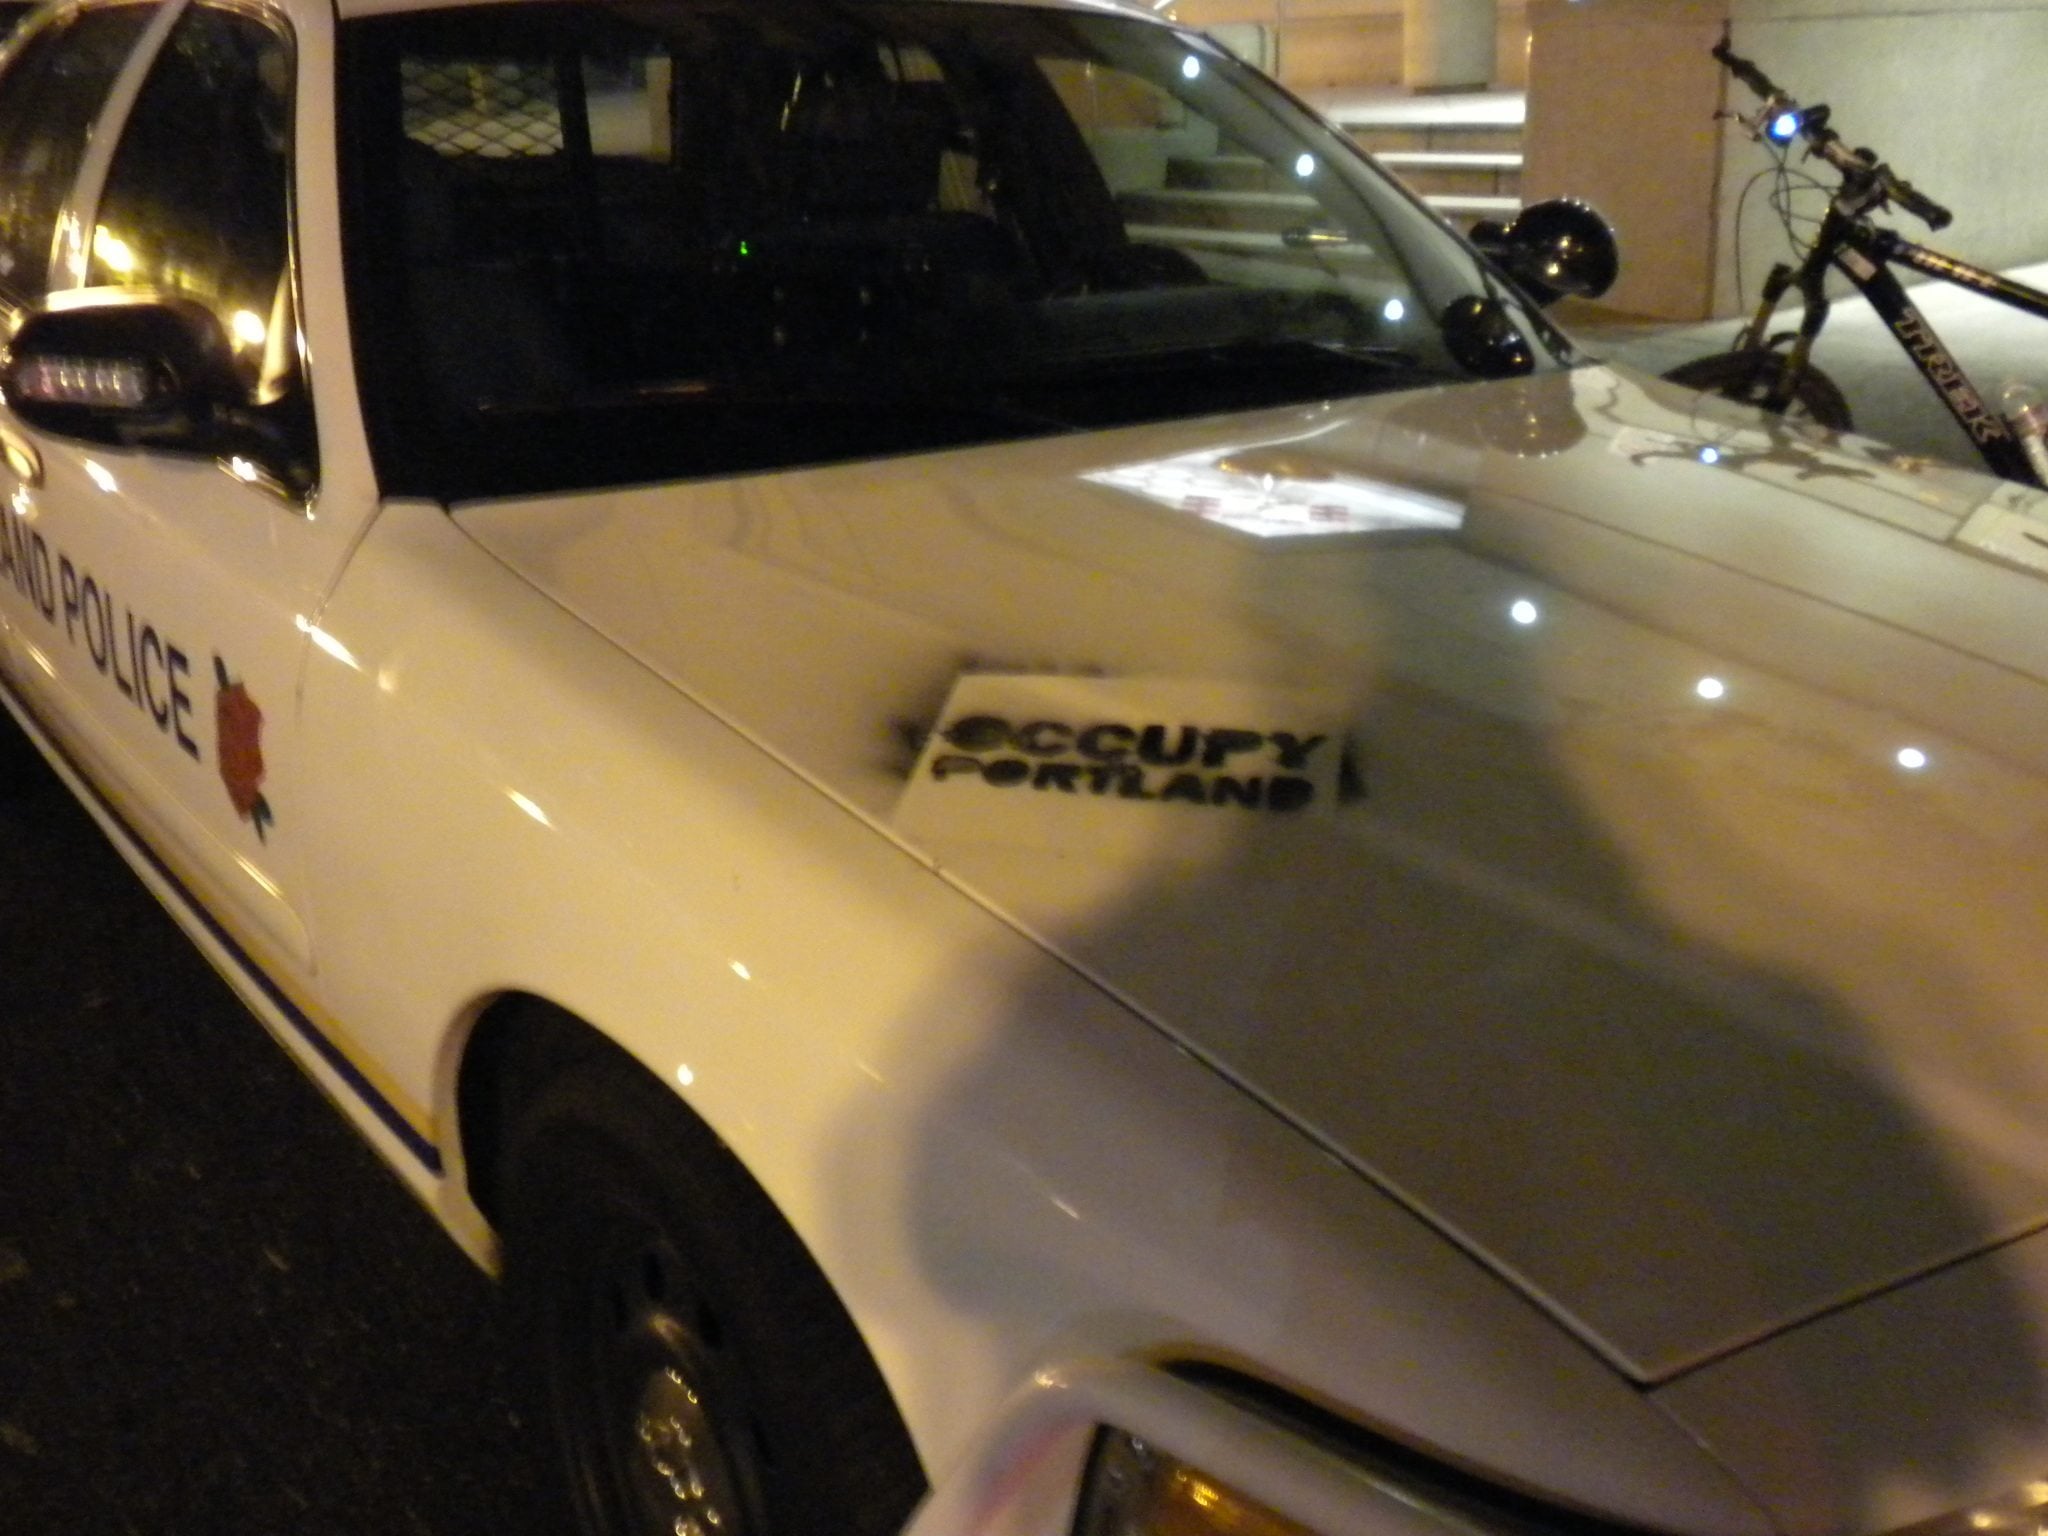 Police arrested two men overnight for allegedly tagging a Portland Police Bureau car, the Pioneer Square Starbucks and several other locations downtown.